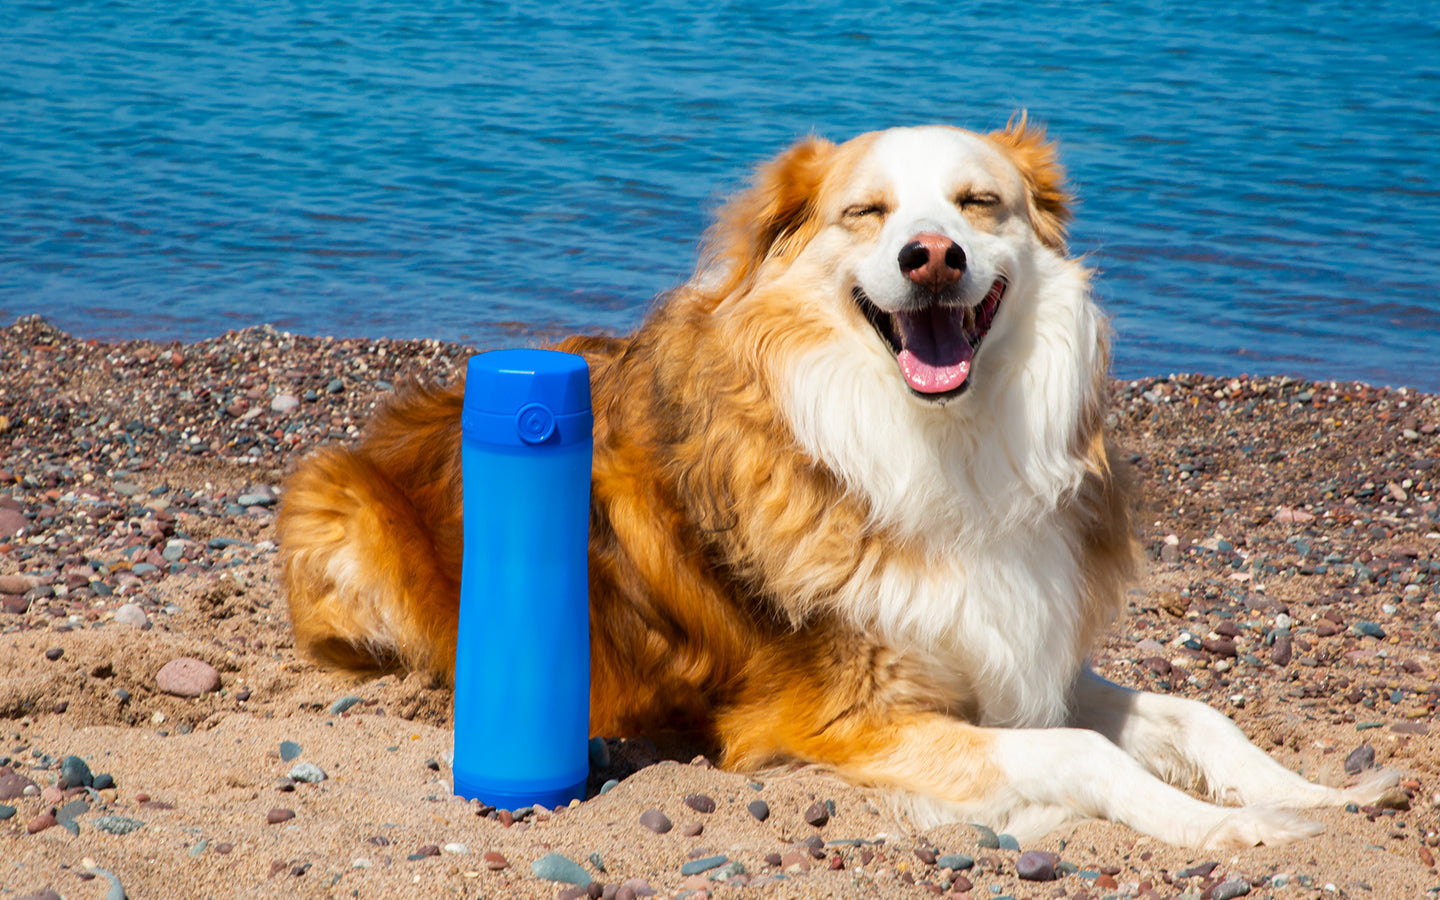 smiling dog sitting next to a royal blue hidratespark 3 bluetooth smart water bottle on a beach